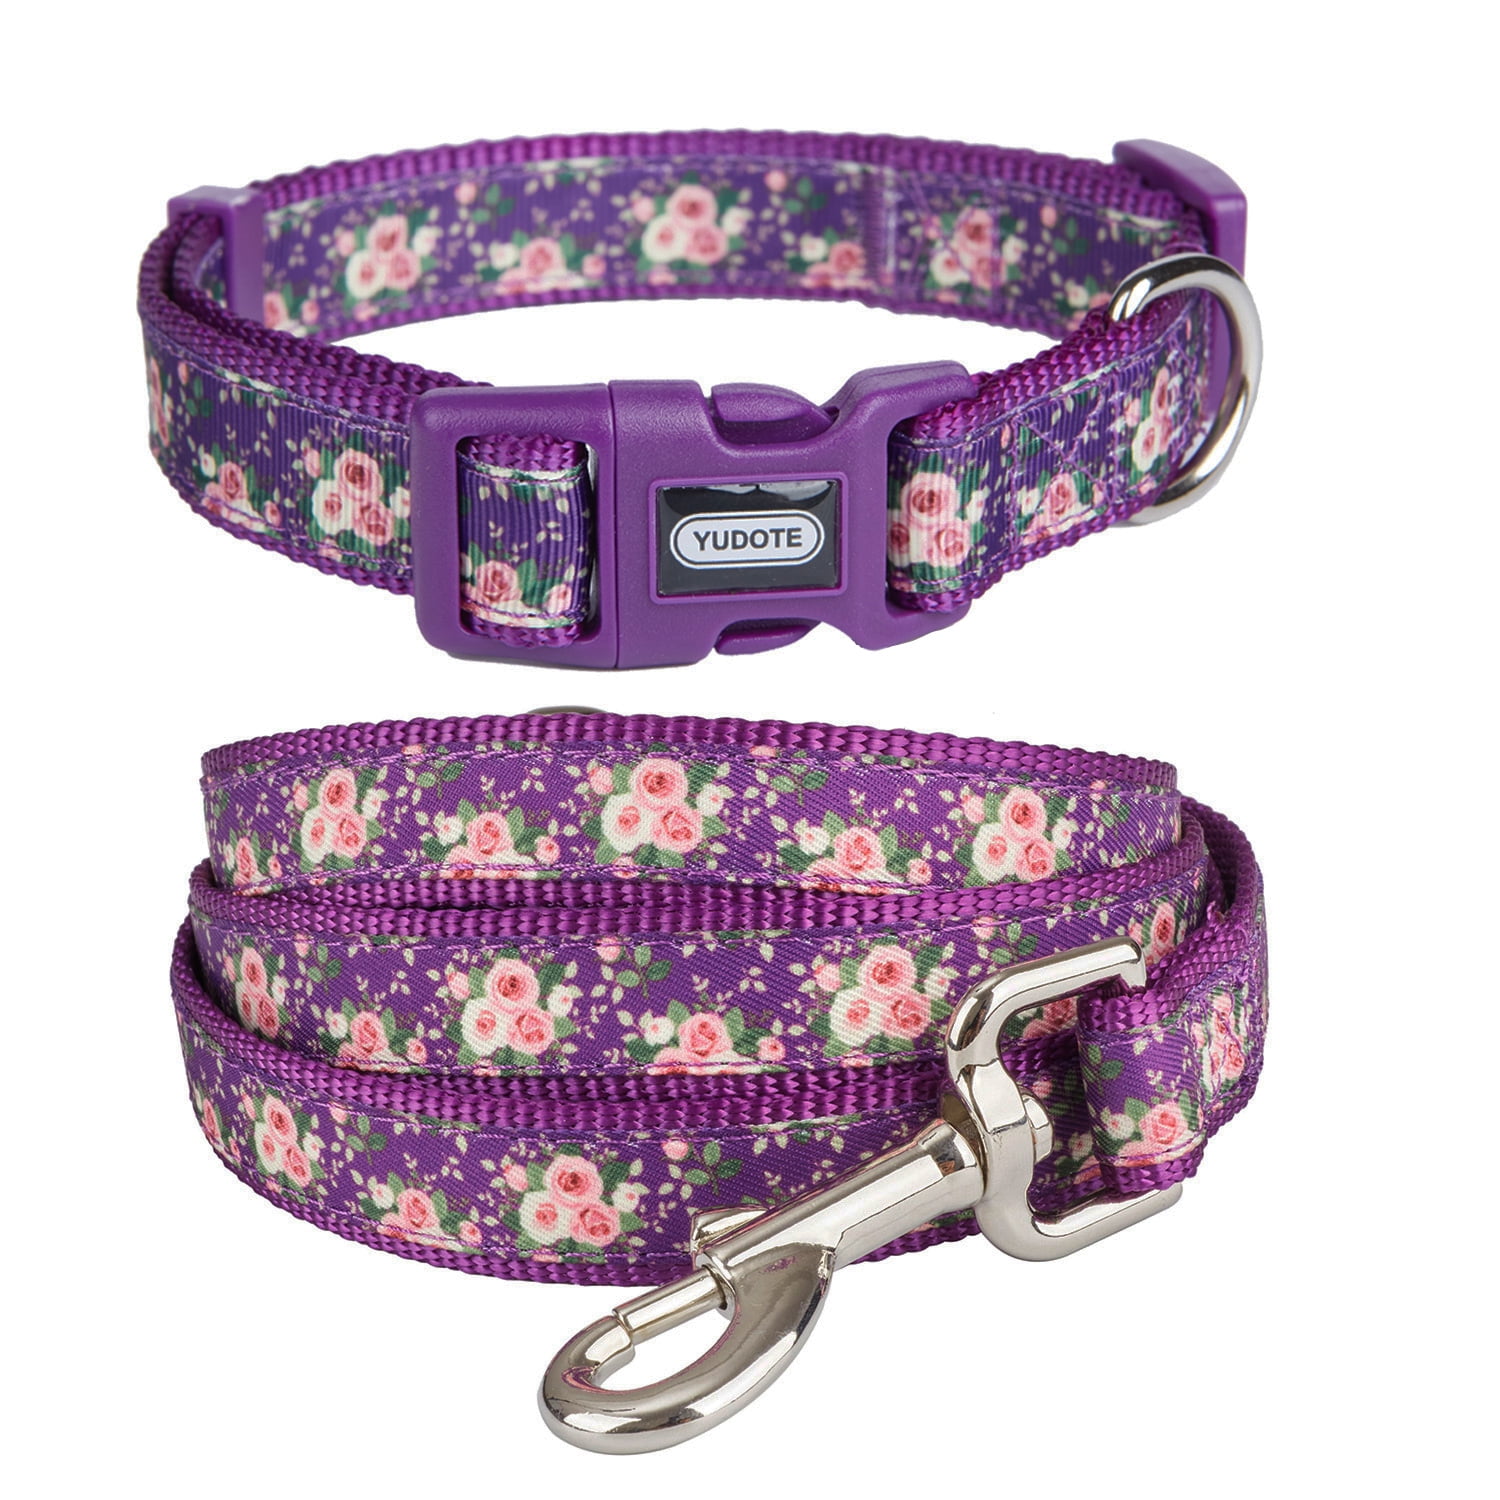 TDTOK Girl Dog Collar for Small Medium Large Dogs, Cute Dog Collar with  Detachable Flower Safety Metal Buckle Adjustable Floral Pattern Soft Comfy